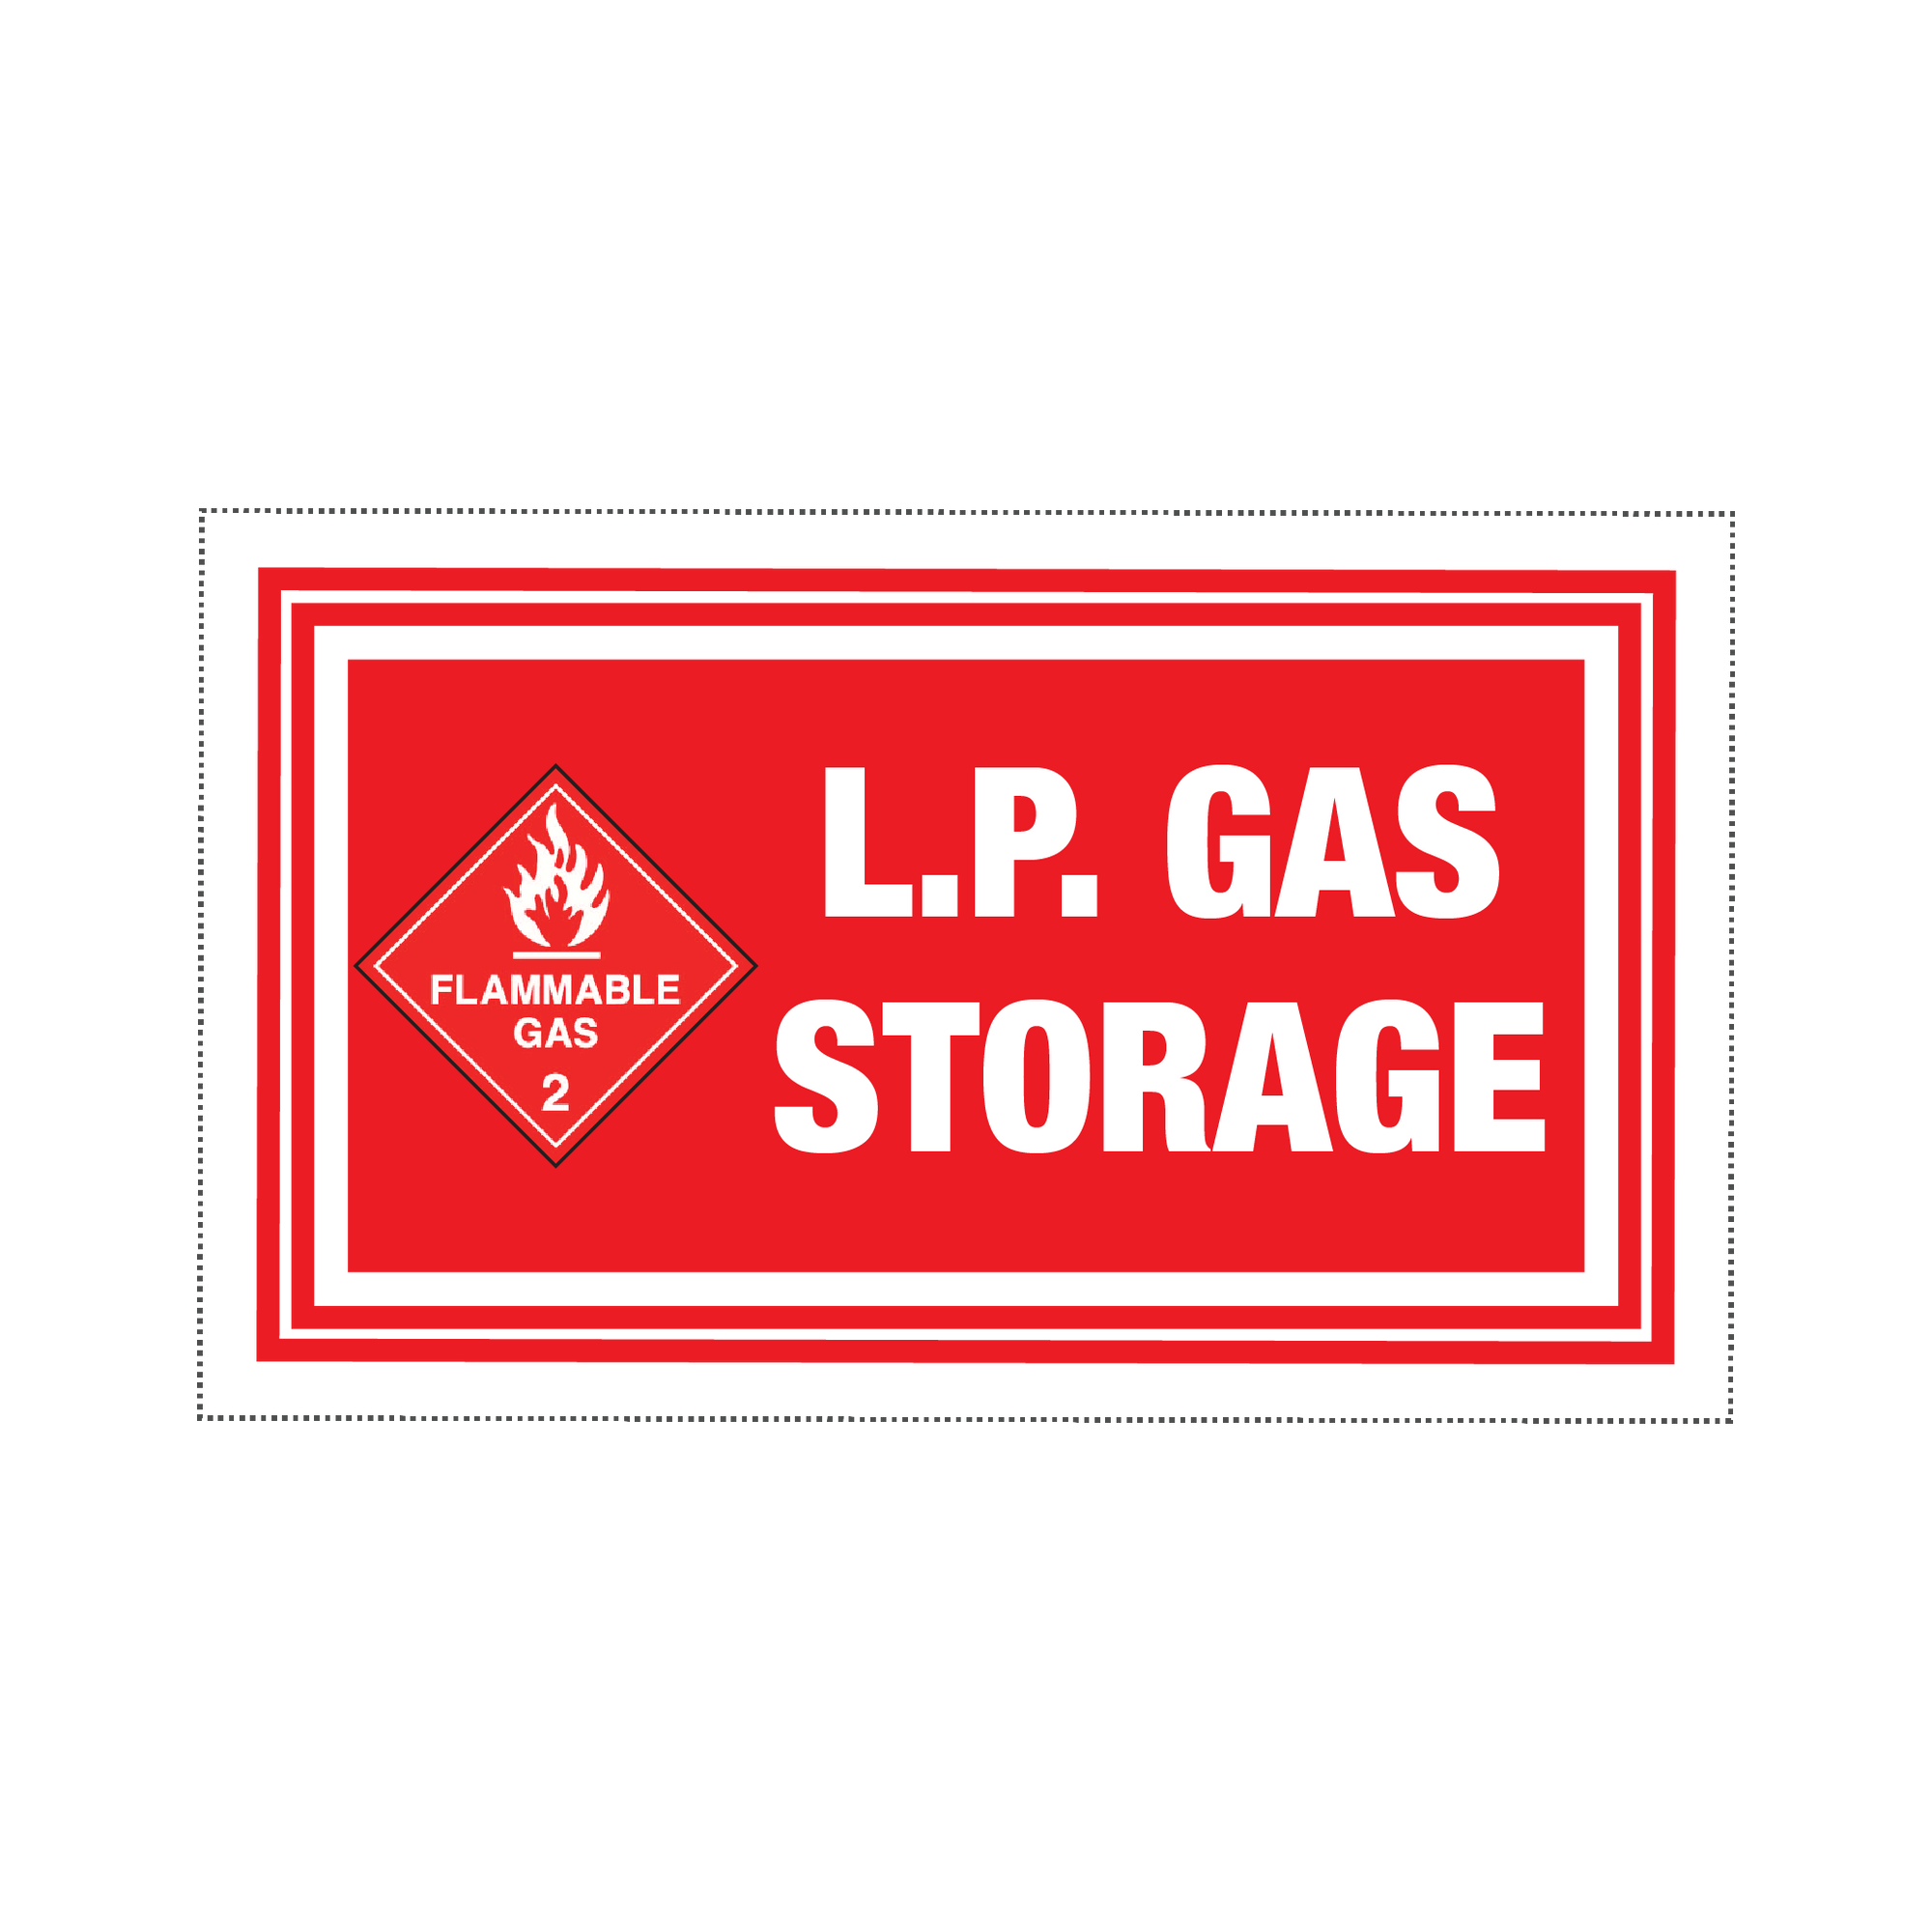 FLAMMABLE GAS 2 - L.P GAS STORAGE - S36